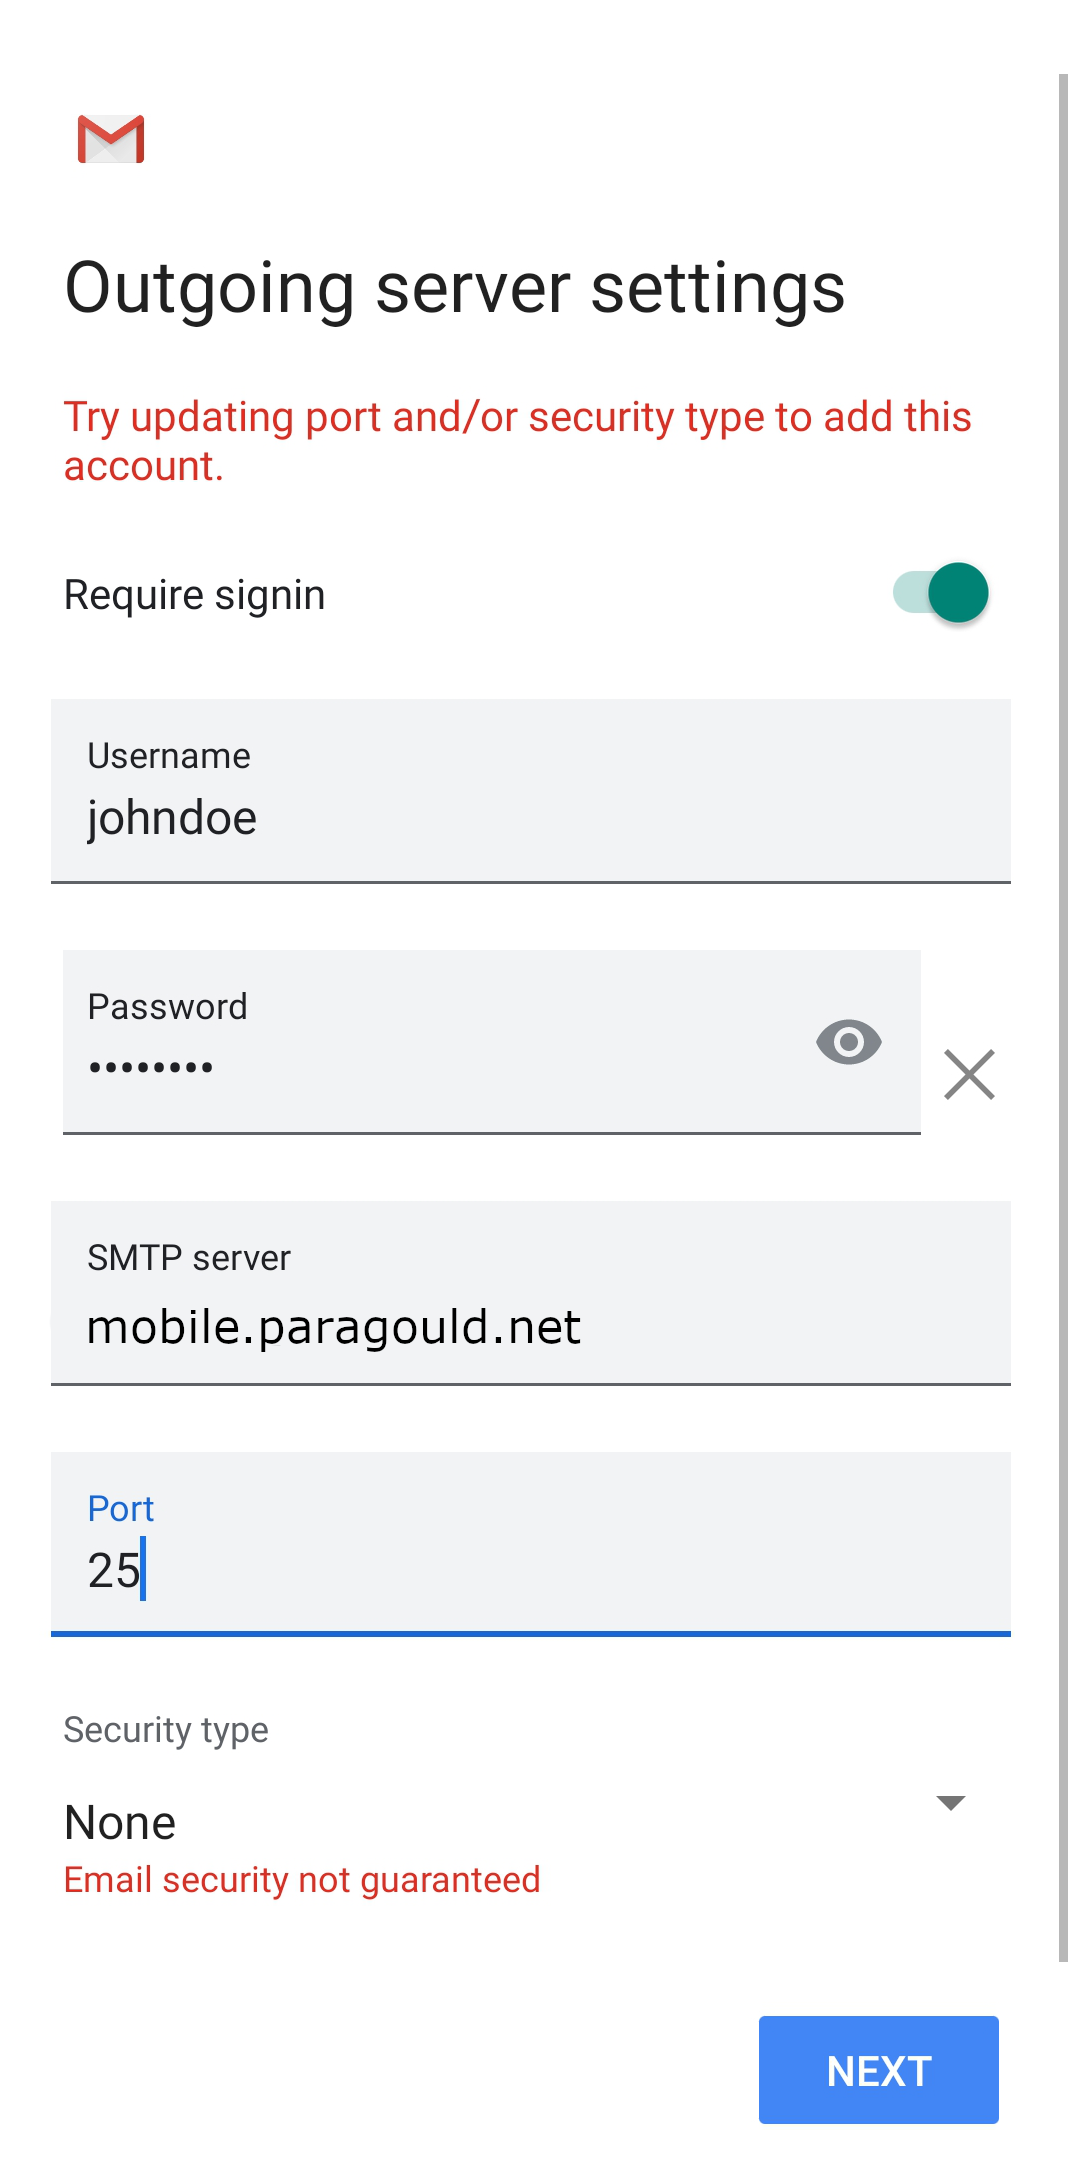 android - outgoing server settings